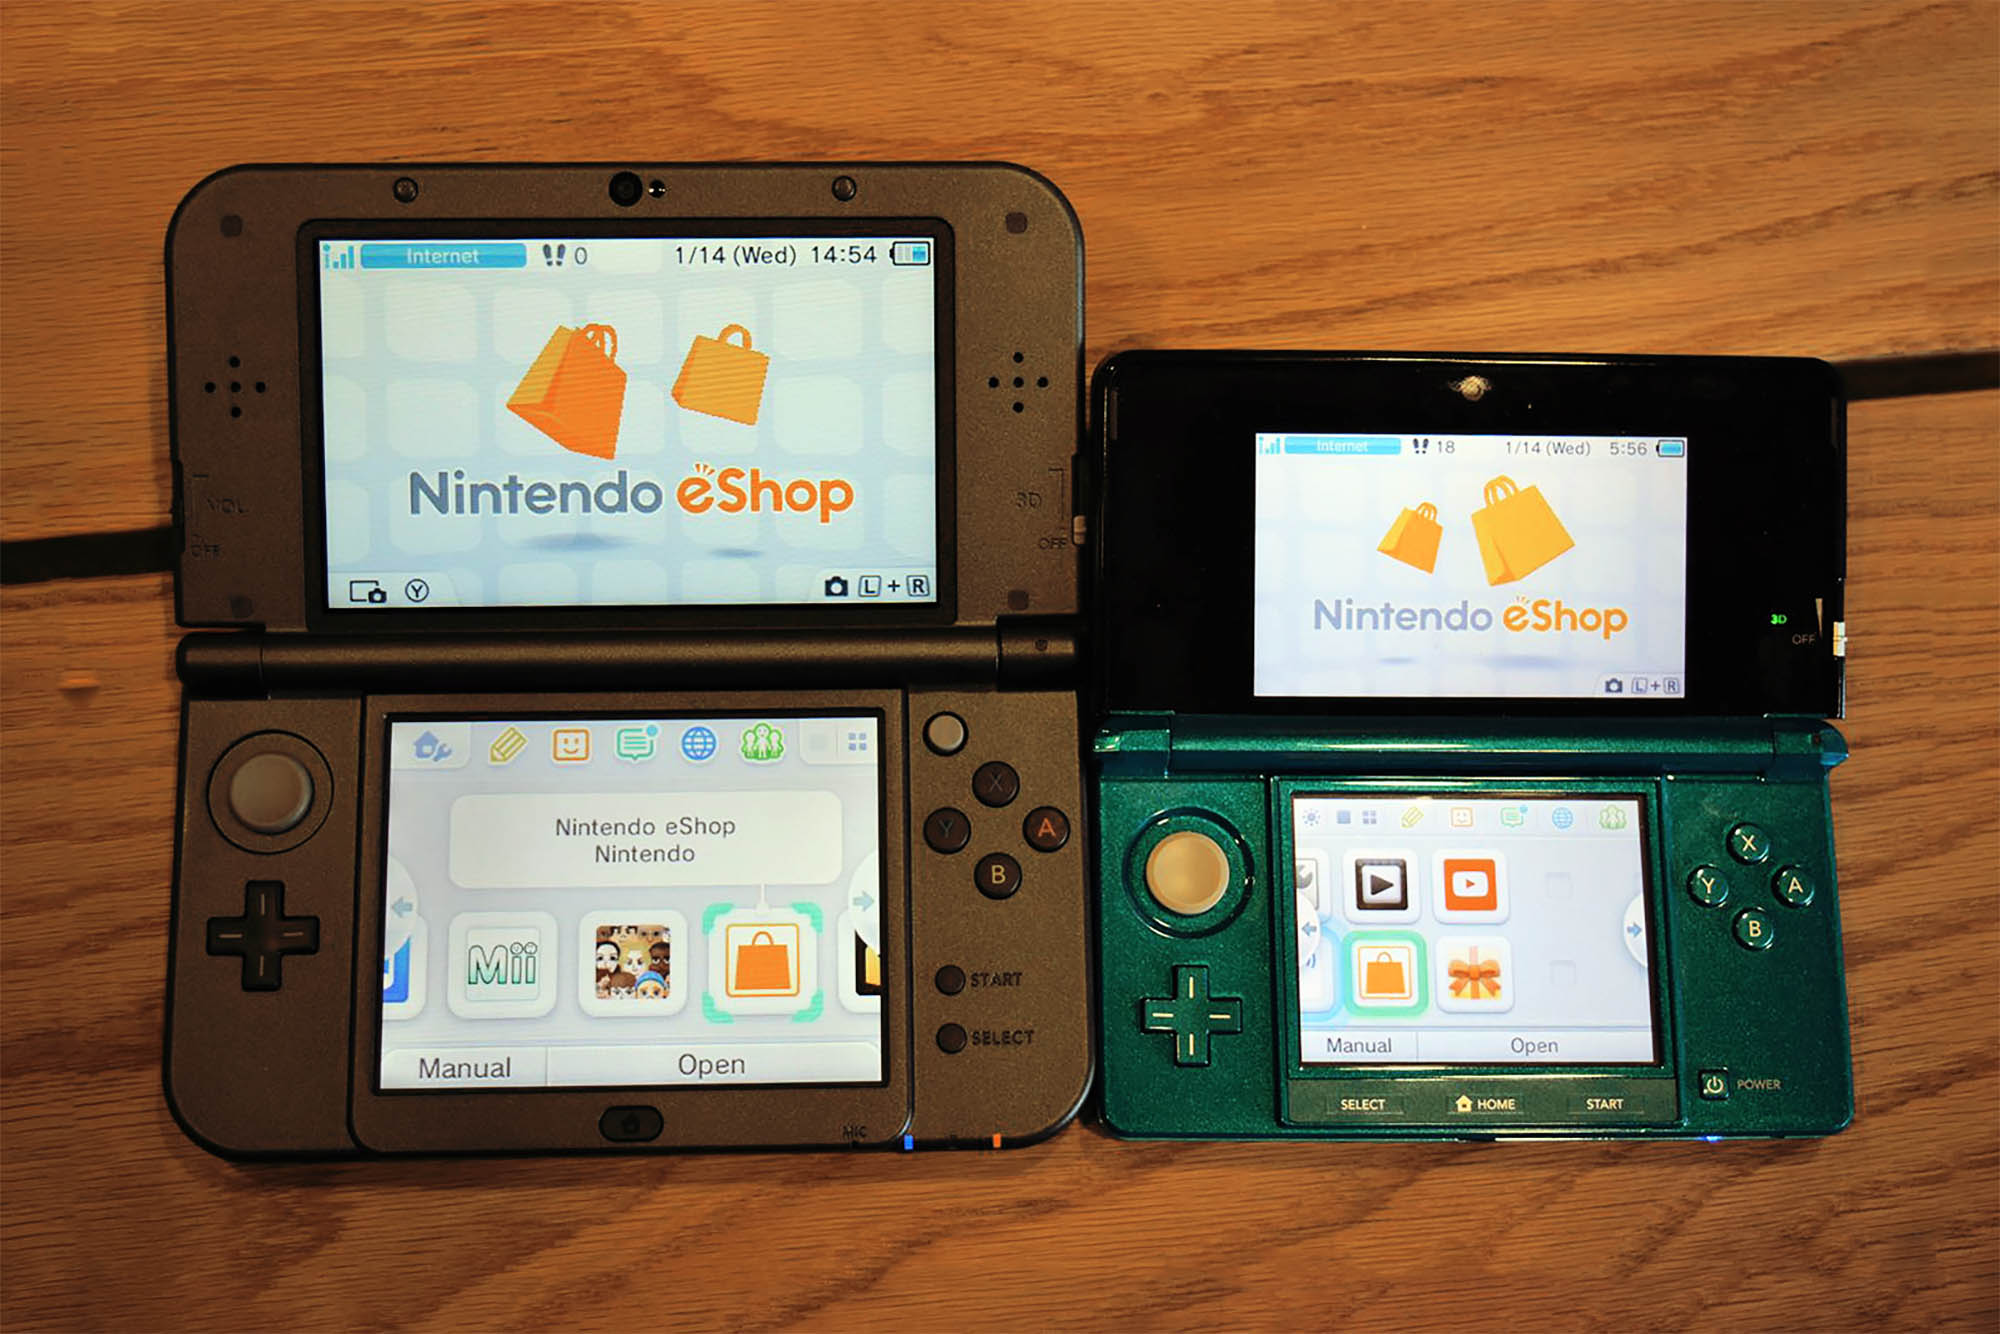 It's Official, The 3DS and Wii U eShops Are Closed < NAG